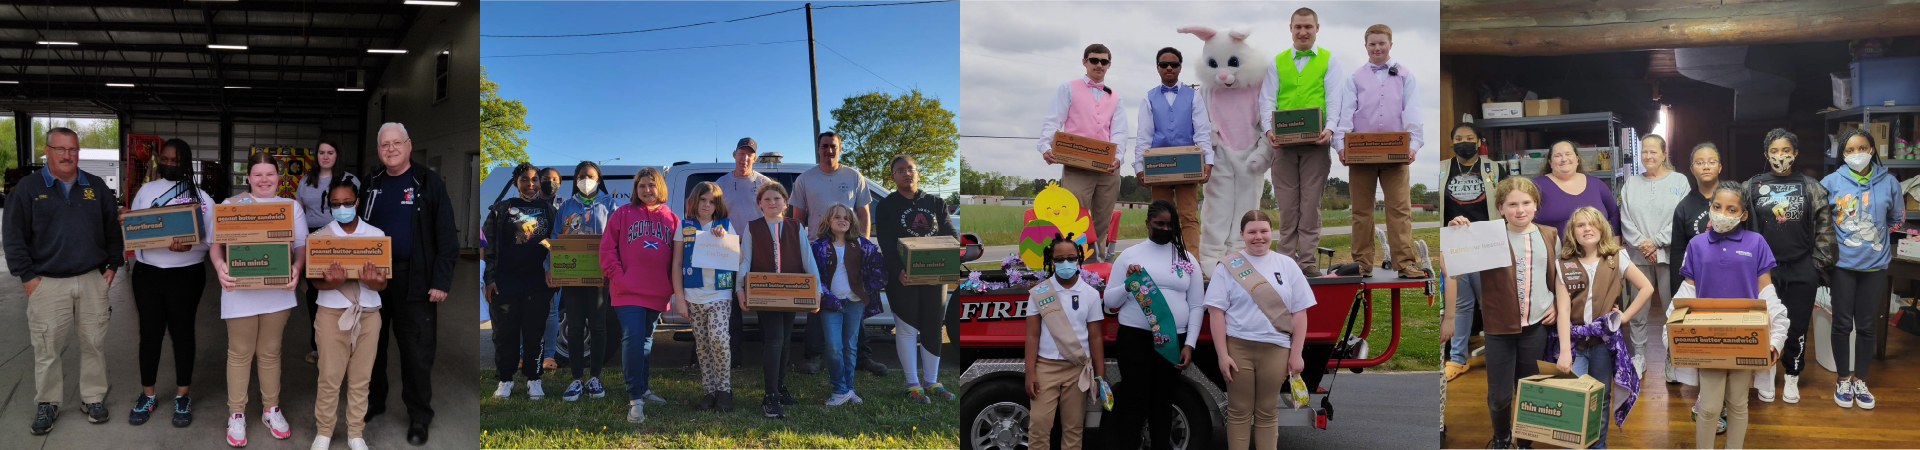  collage of Girl Scouts delivering cookies to a variety of community groups 